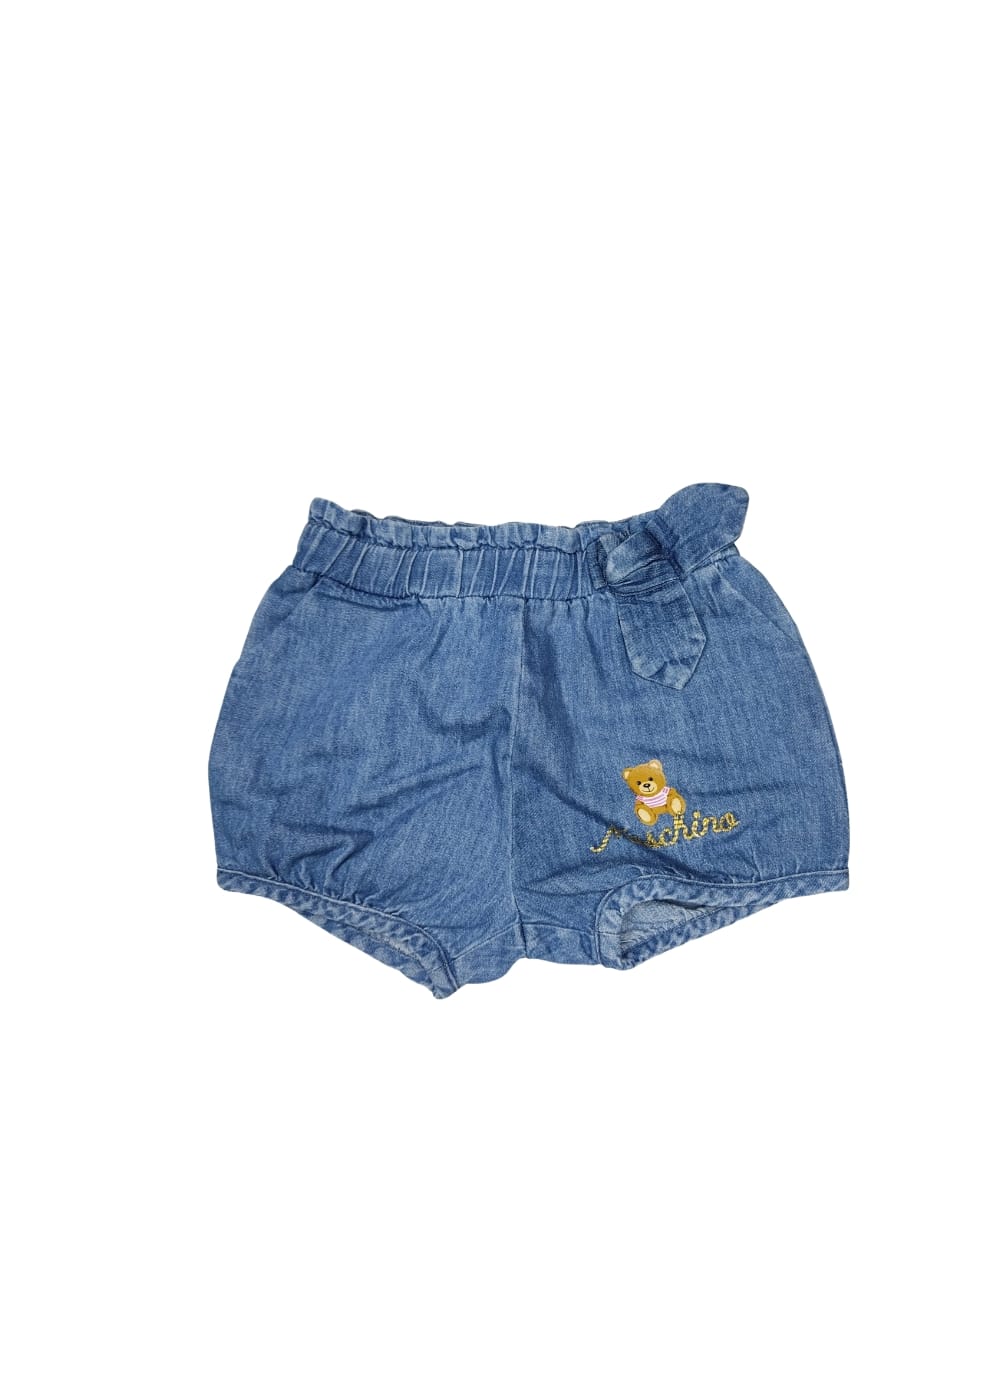 Featured image for “Moschino Shorts”